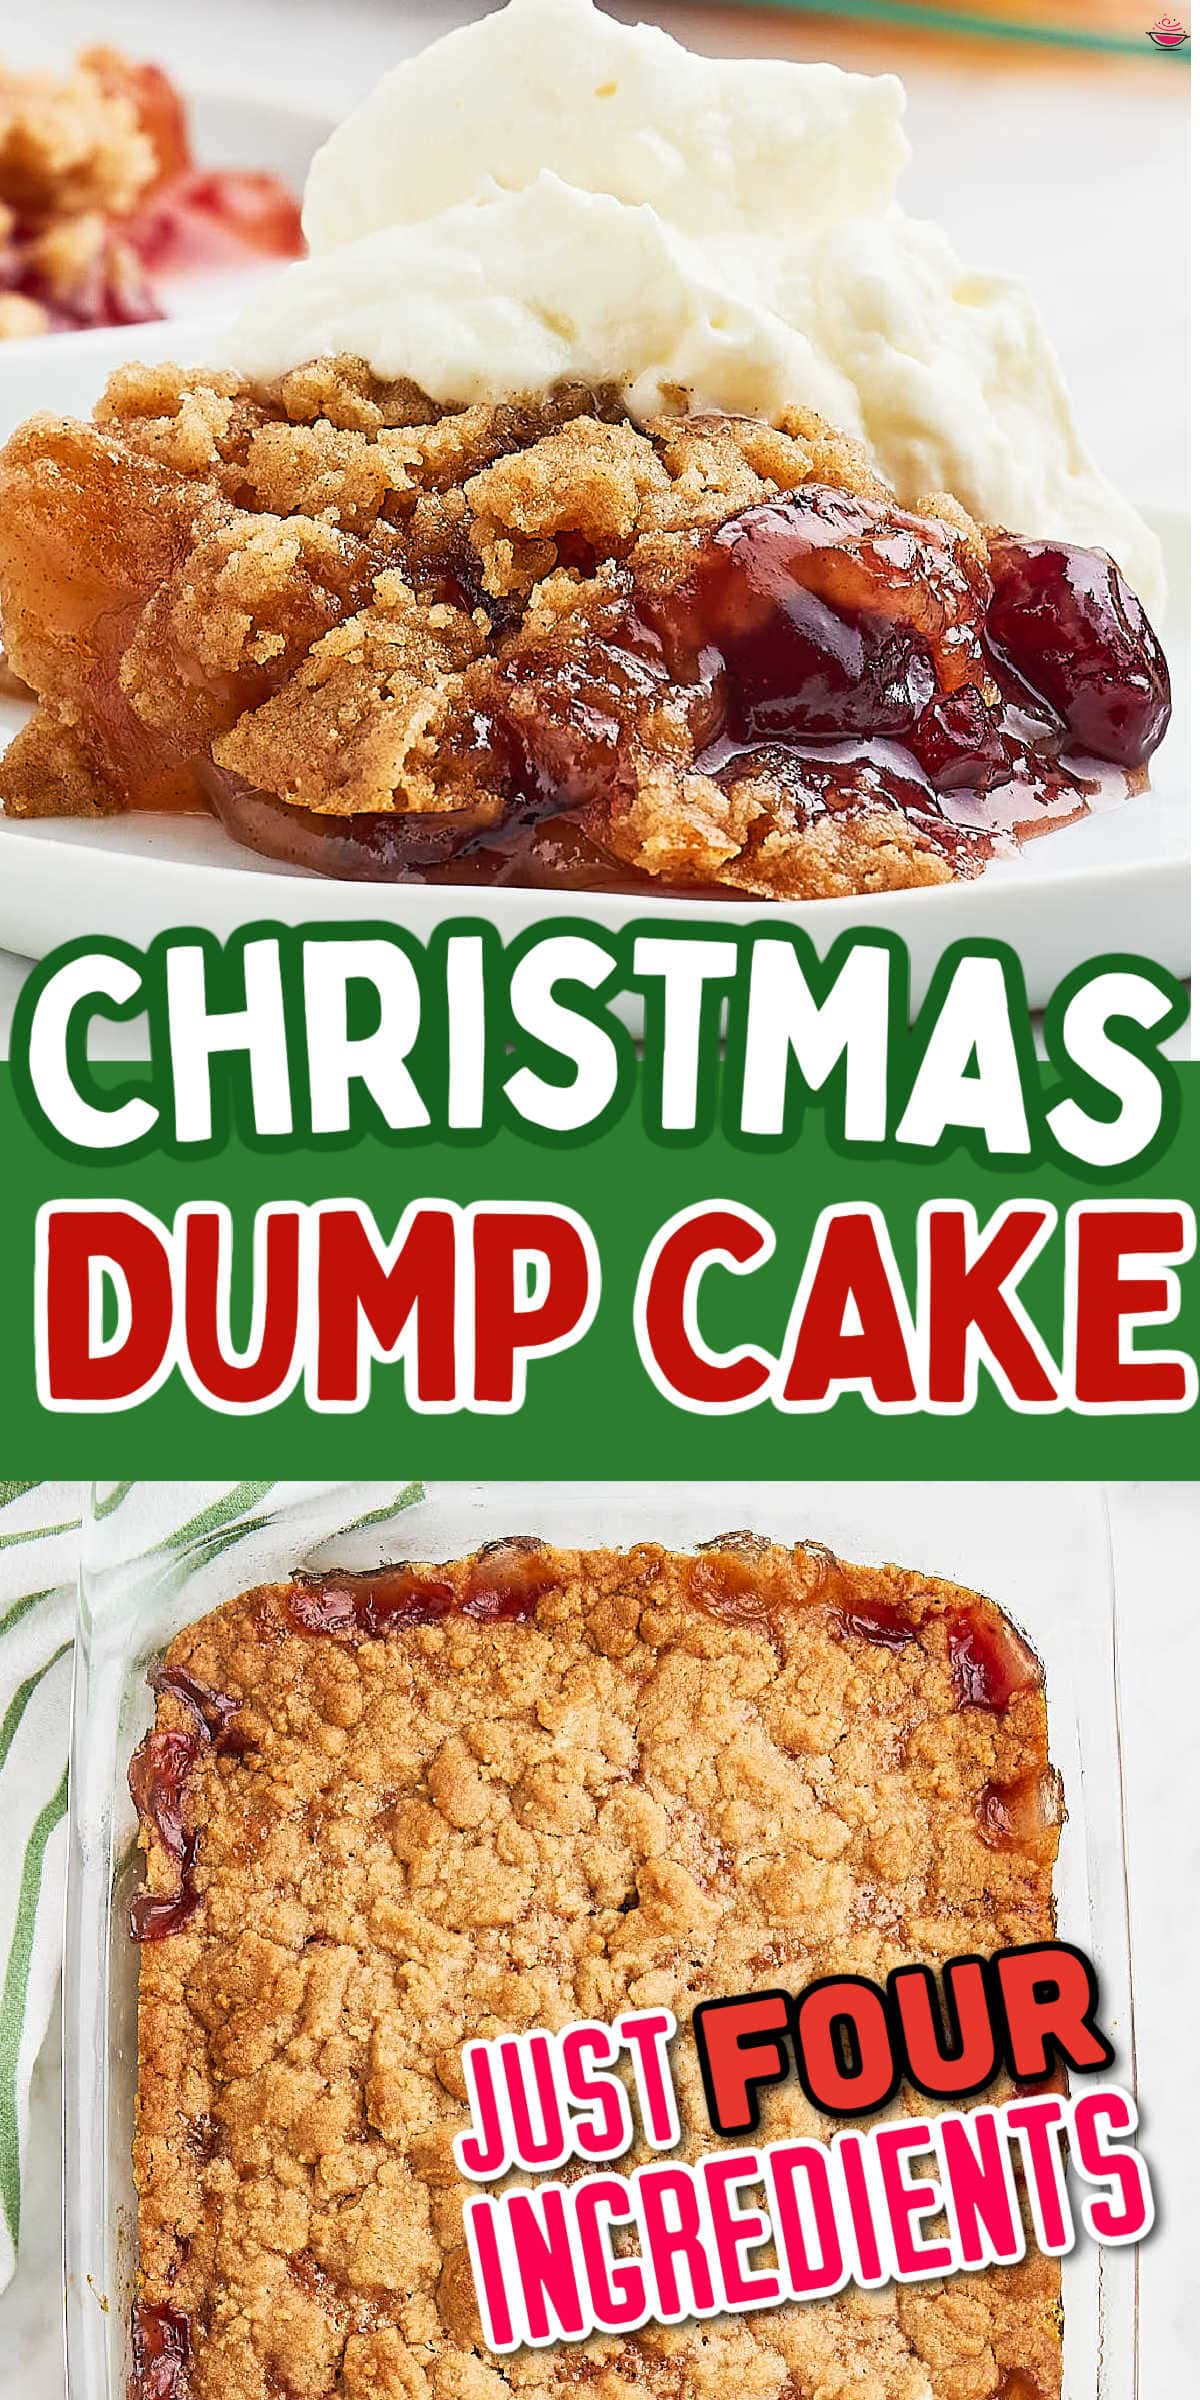 The simplicity of a dump cake, the cheerfulness of Christmas! With apples, cranberries, and a warm cinnamon crumble, this dessert is delicious and takes only minutes to make. #cheerfulcook #dumpcake #christmasdumpcake #christmascake #easybaking via @cheerfulcook